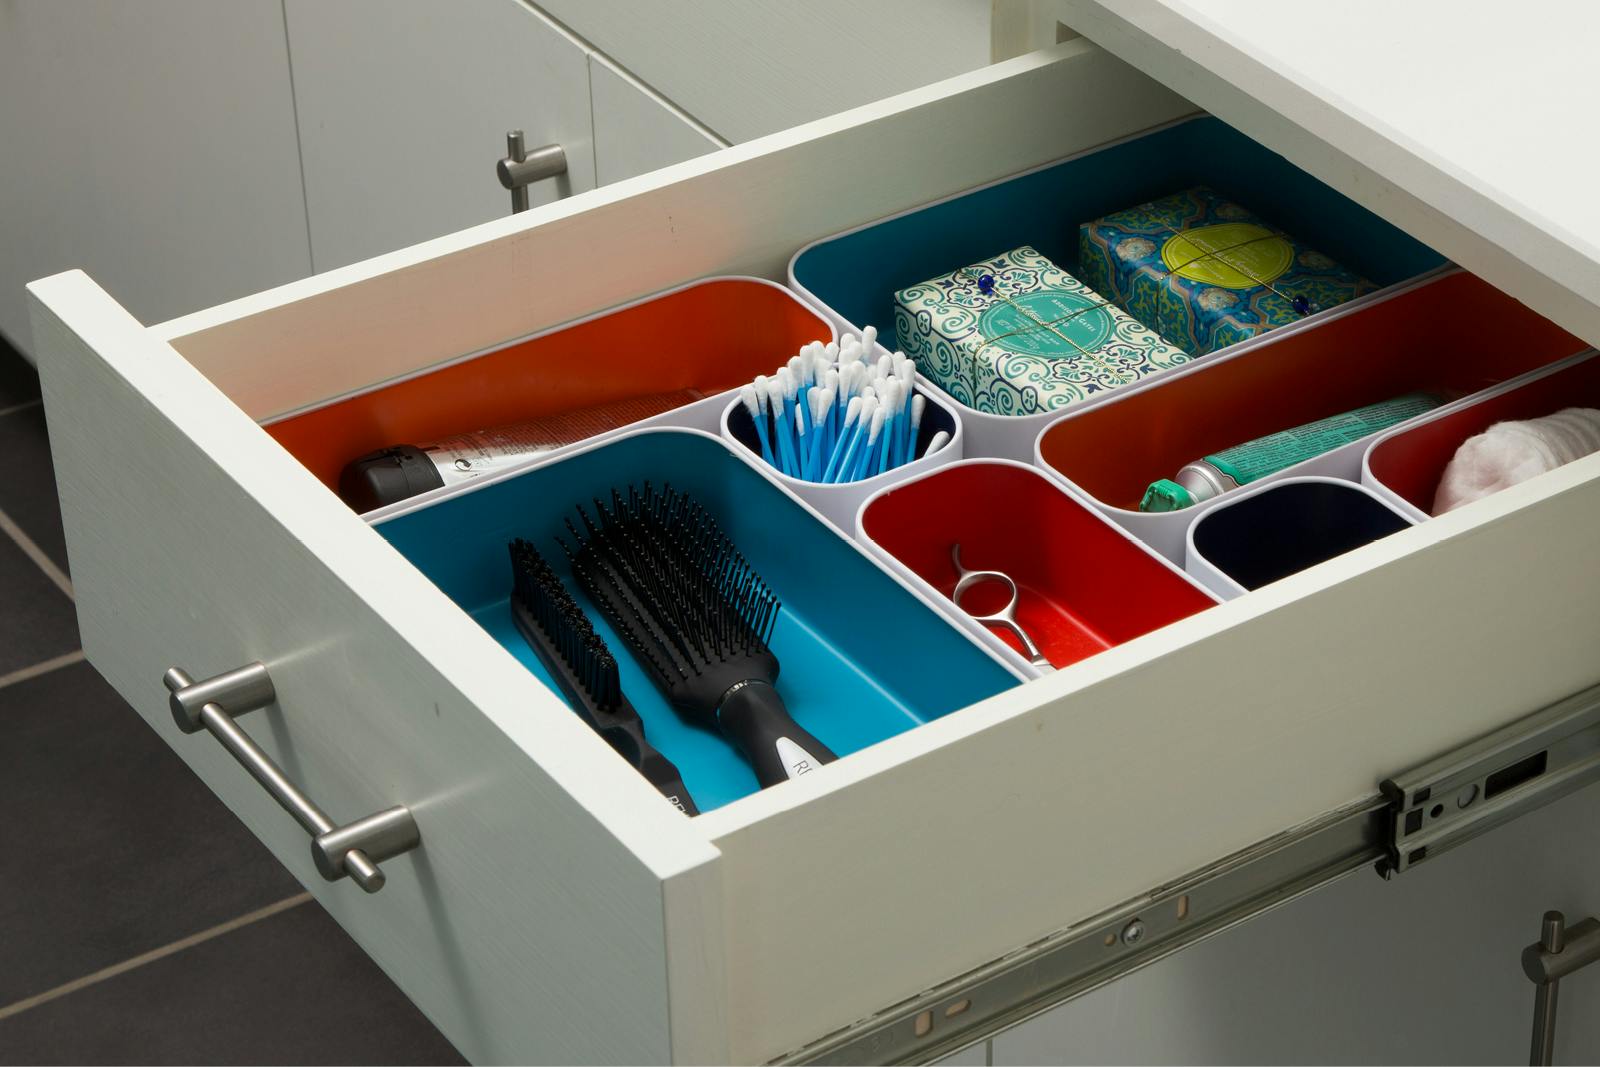 Bathroom Storage Ideas - How To Organize Your Bathroom | The Container ...